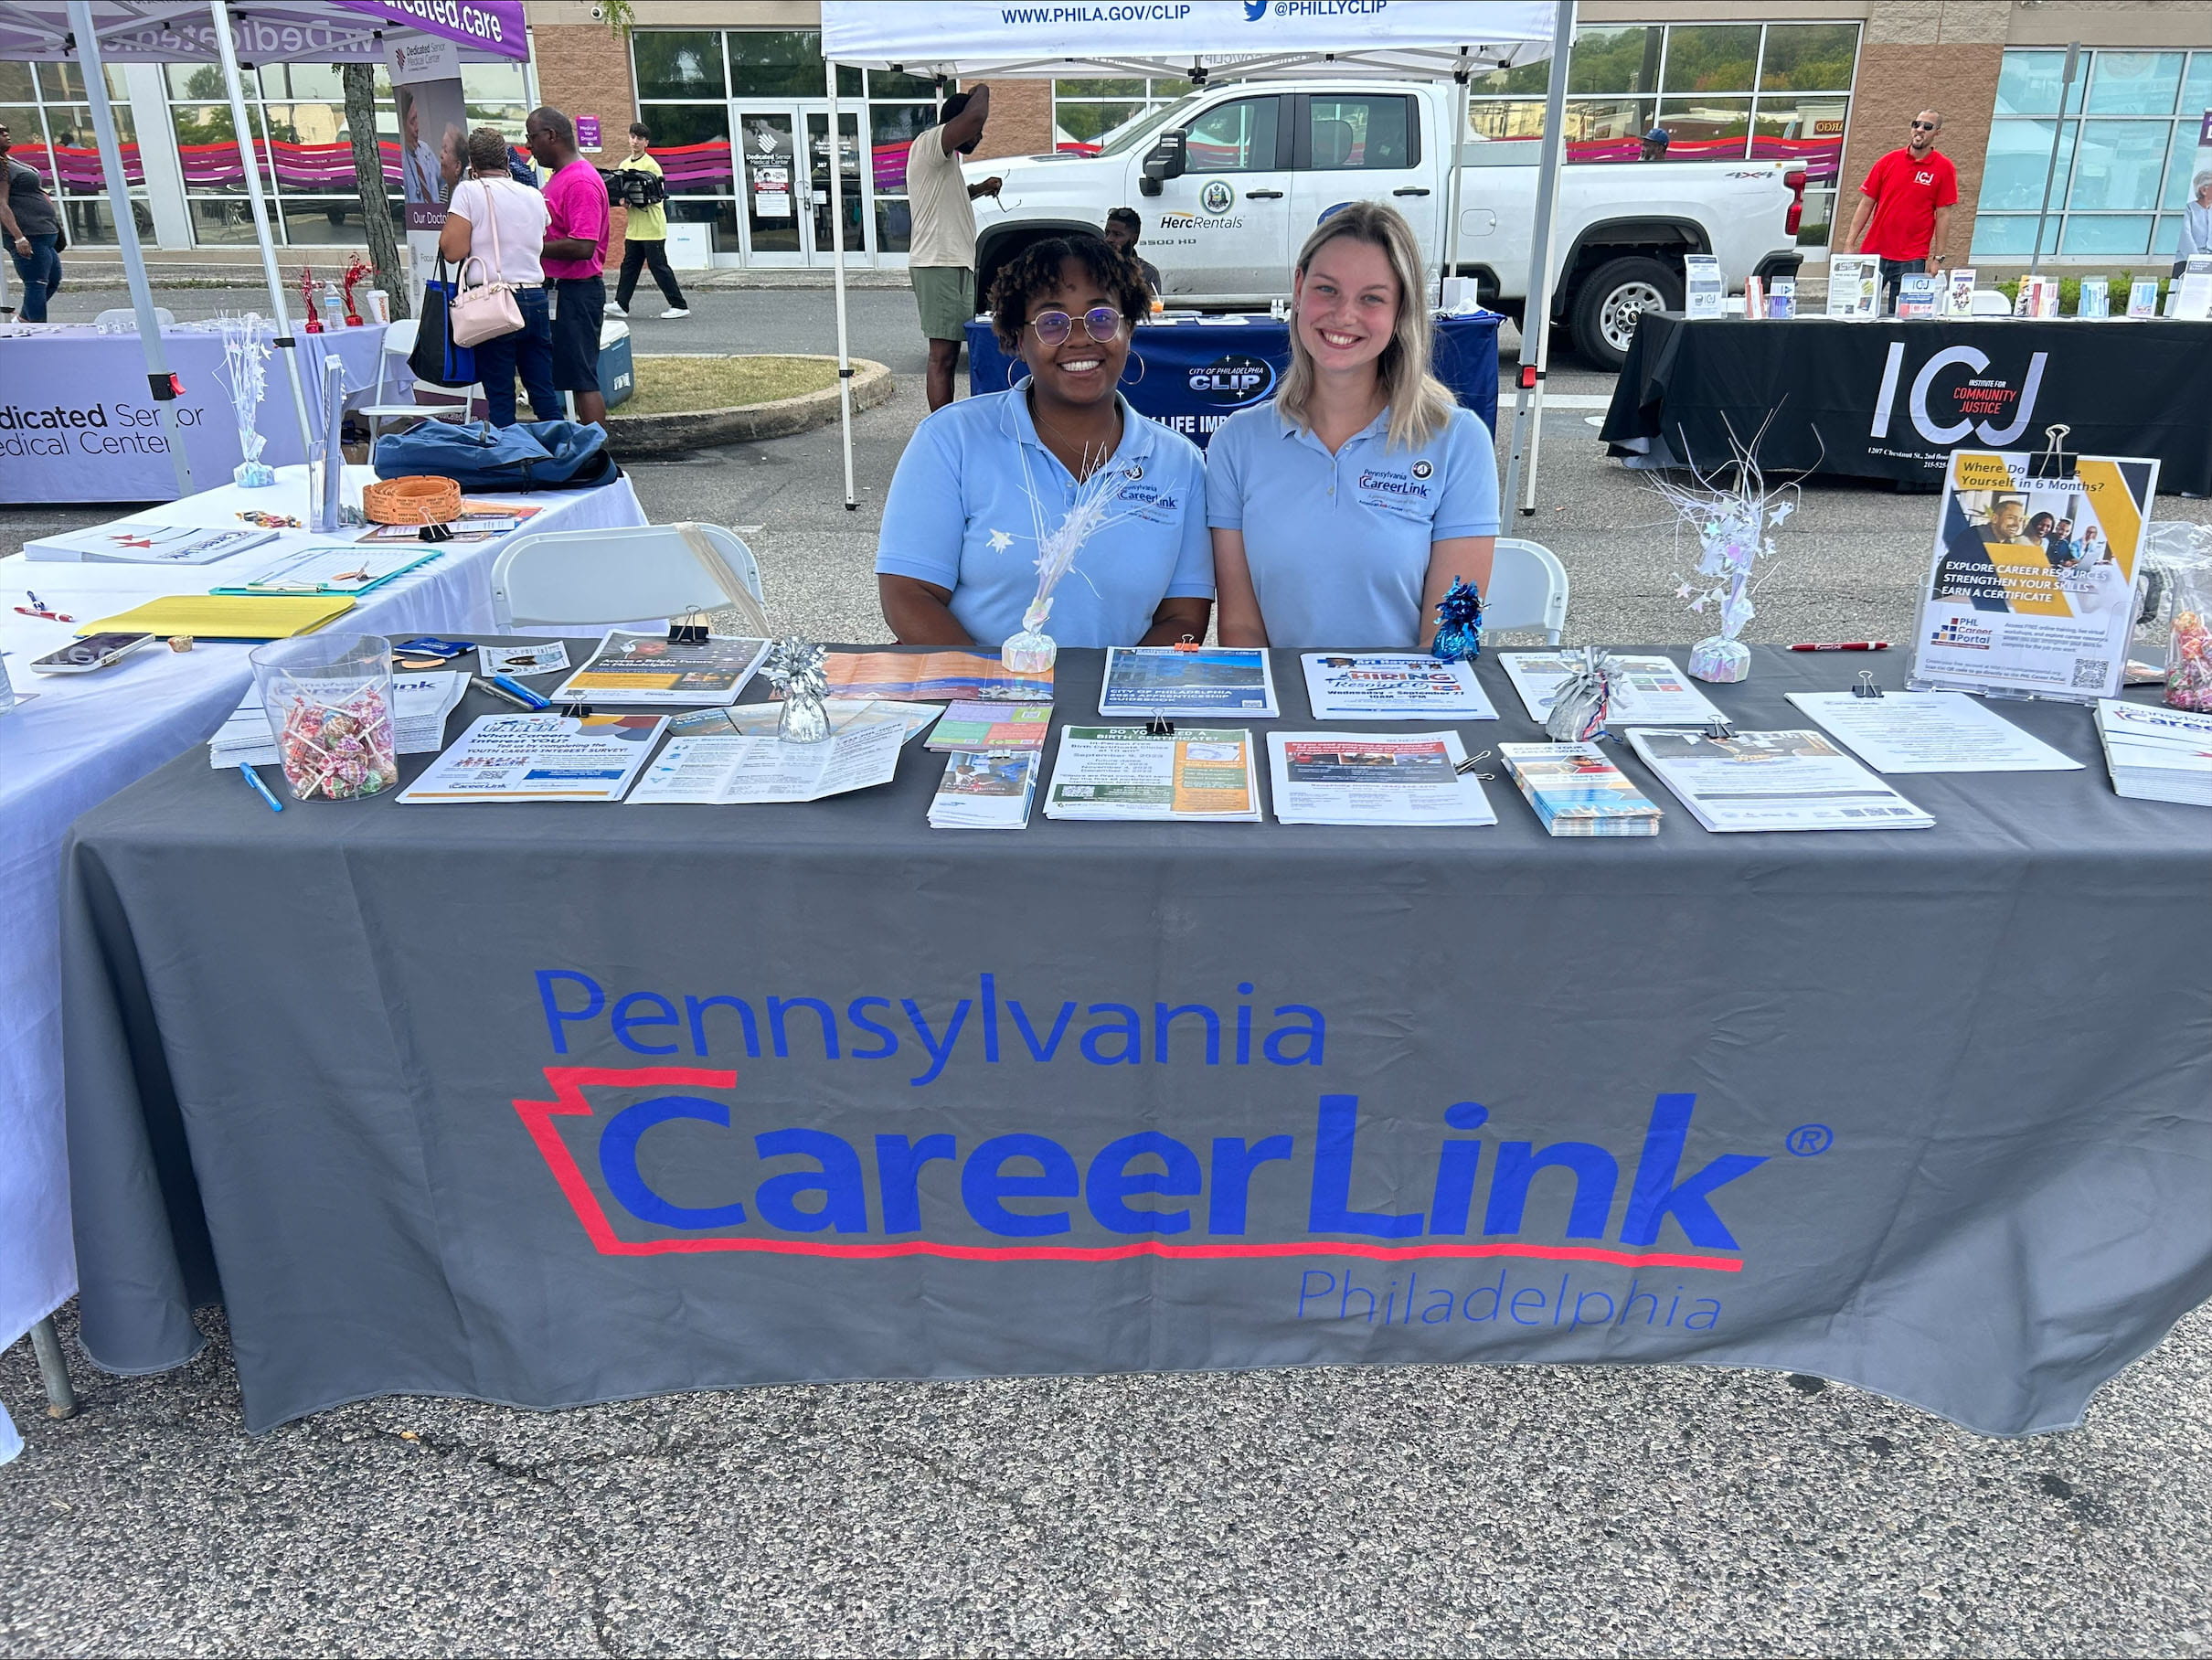 Two students sit behind a table with the words "Pennsylvania Career Link."